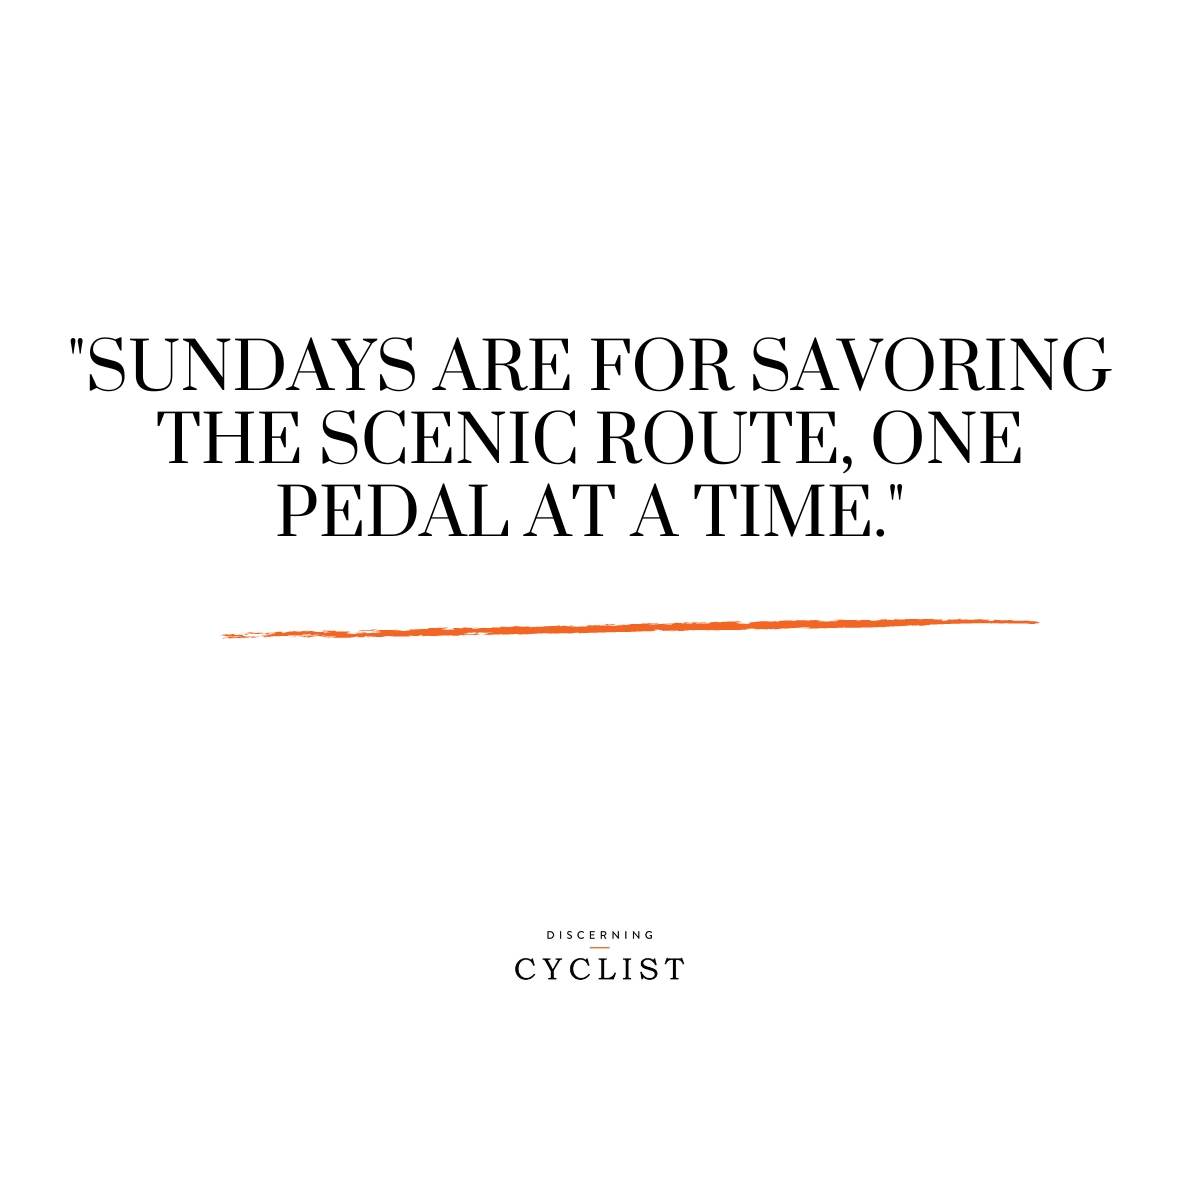 "Sundays are for savoring the scenic route, one pedal at a time."